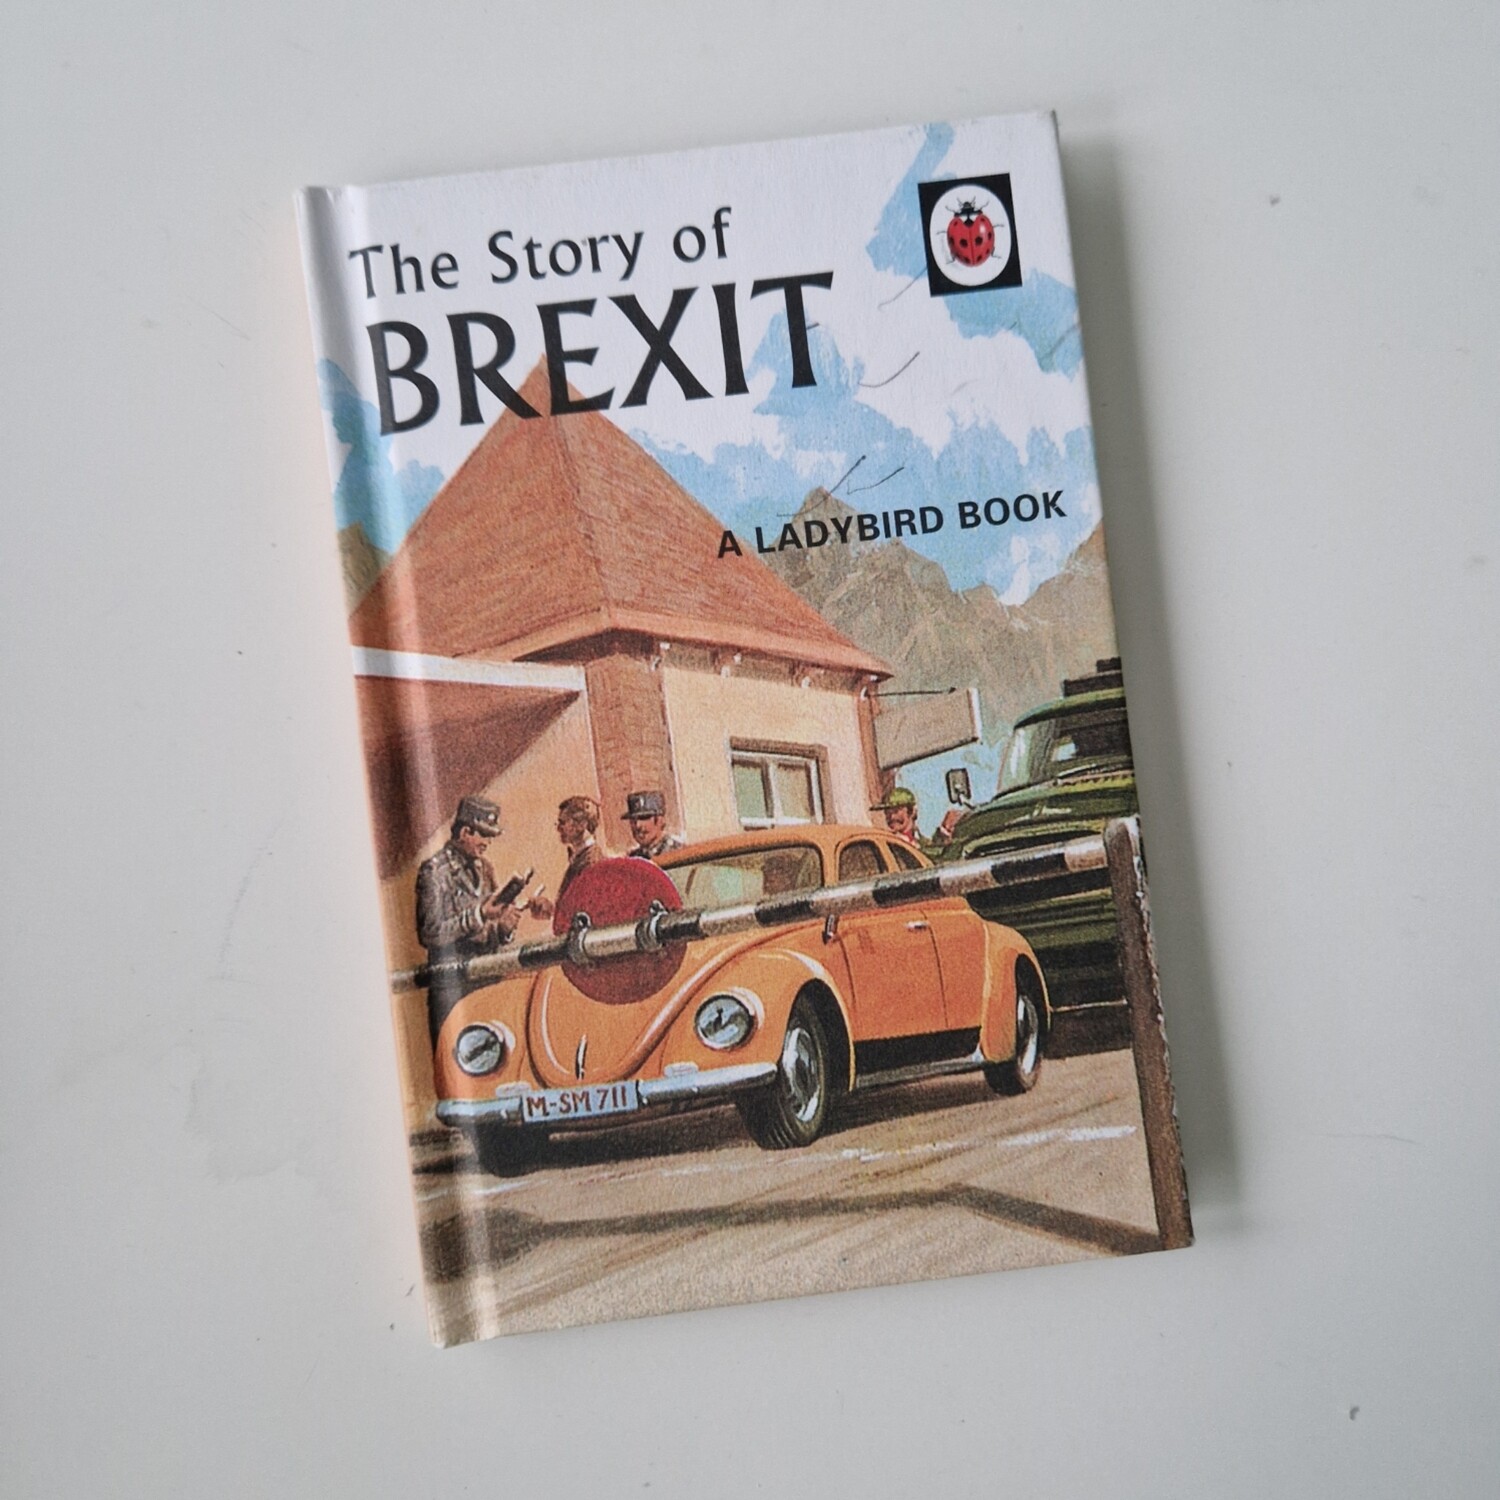 The Story of Brexit - ladybird book - Beetle VW